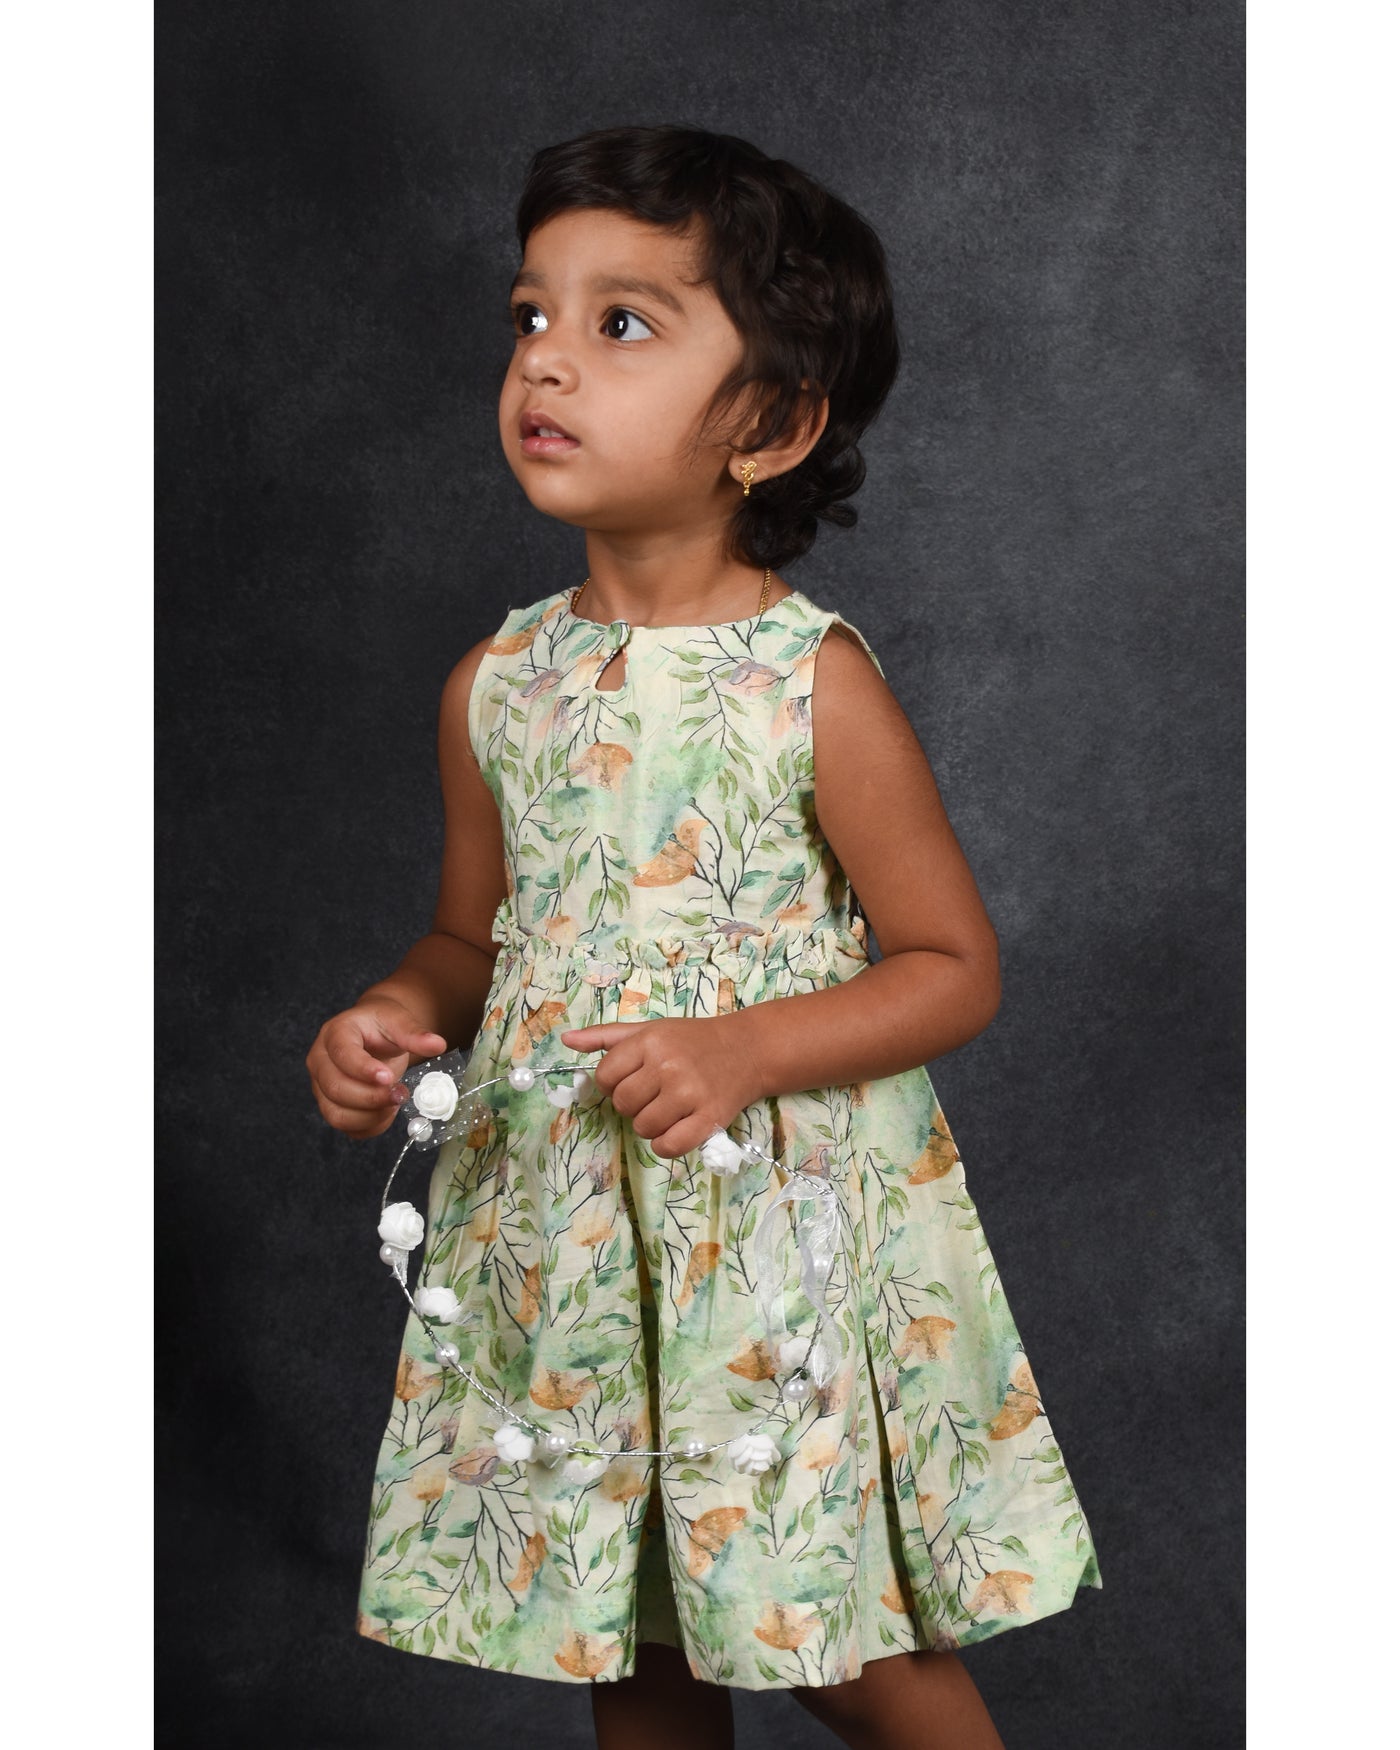 Aria - Off White and Light Green Leaf Printed Khadhi Frock